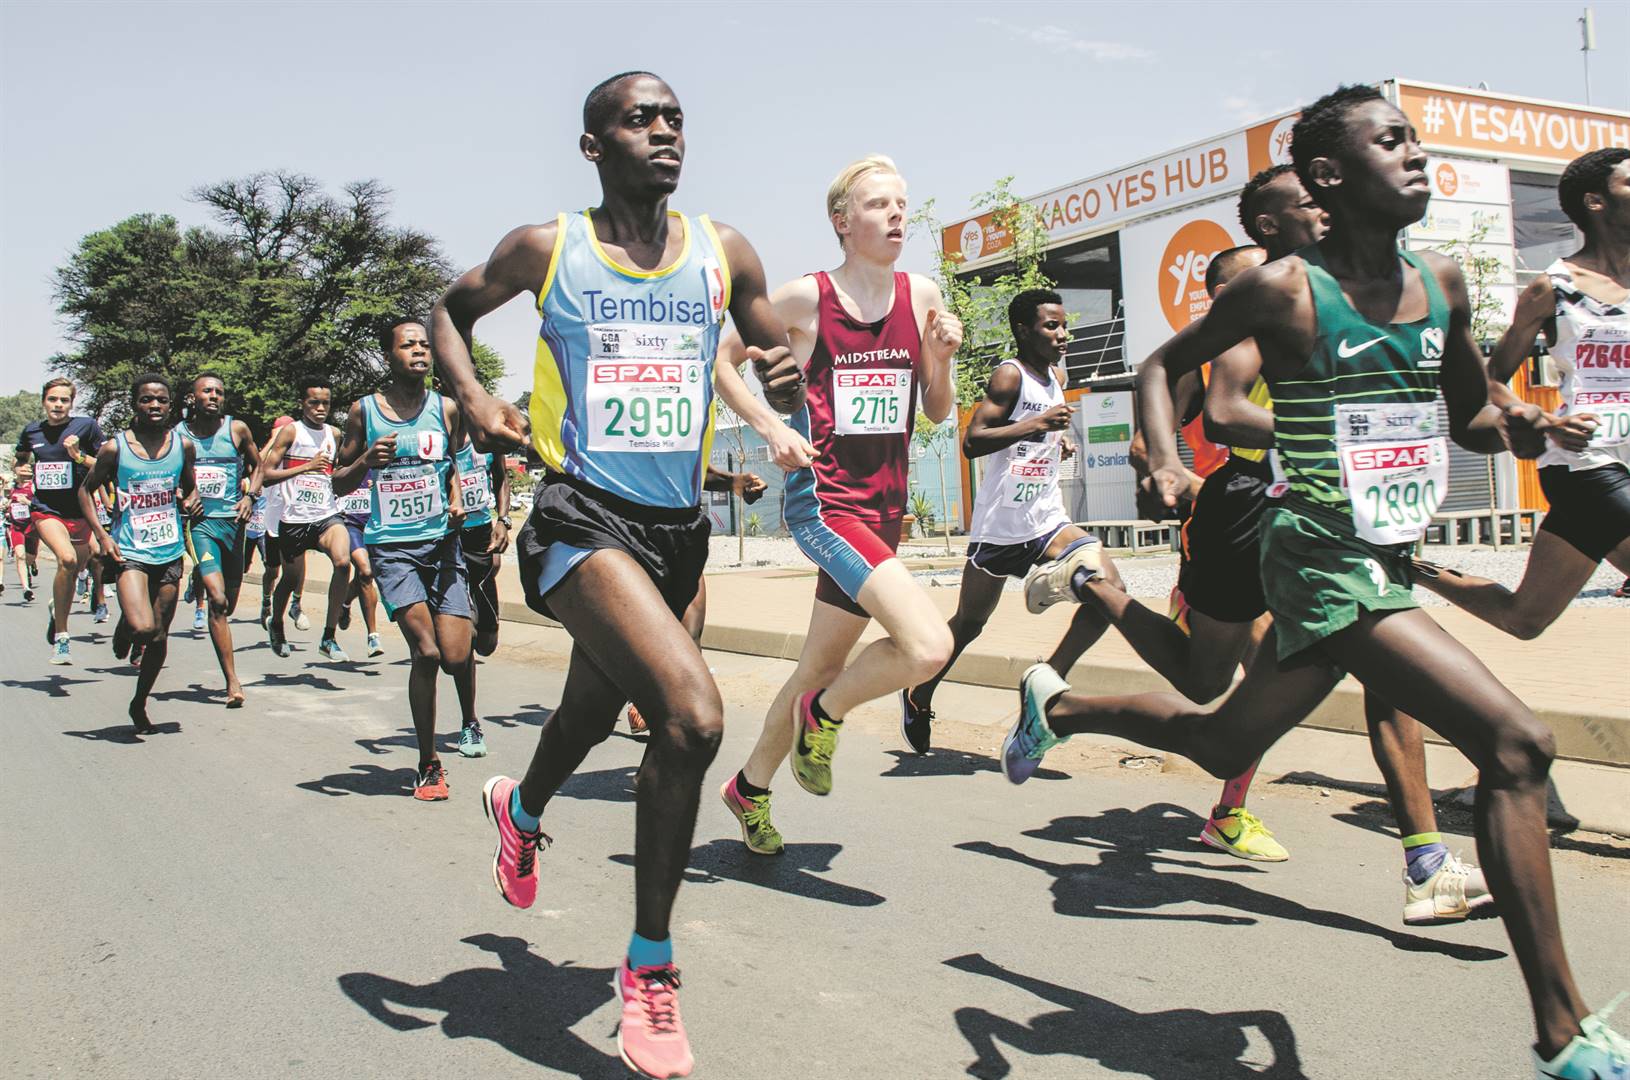 The Spar Thembisa Mile attracts runners from all walks of life, including some of the country’s top middle-distance athletes. Photo: Jetline Action